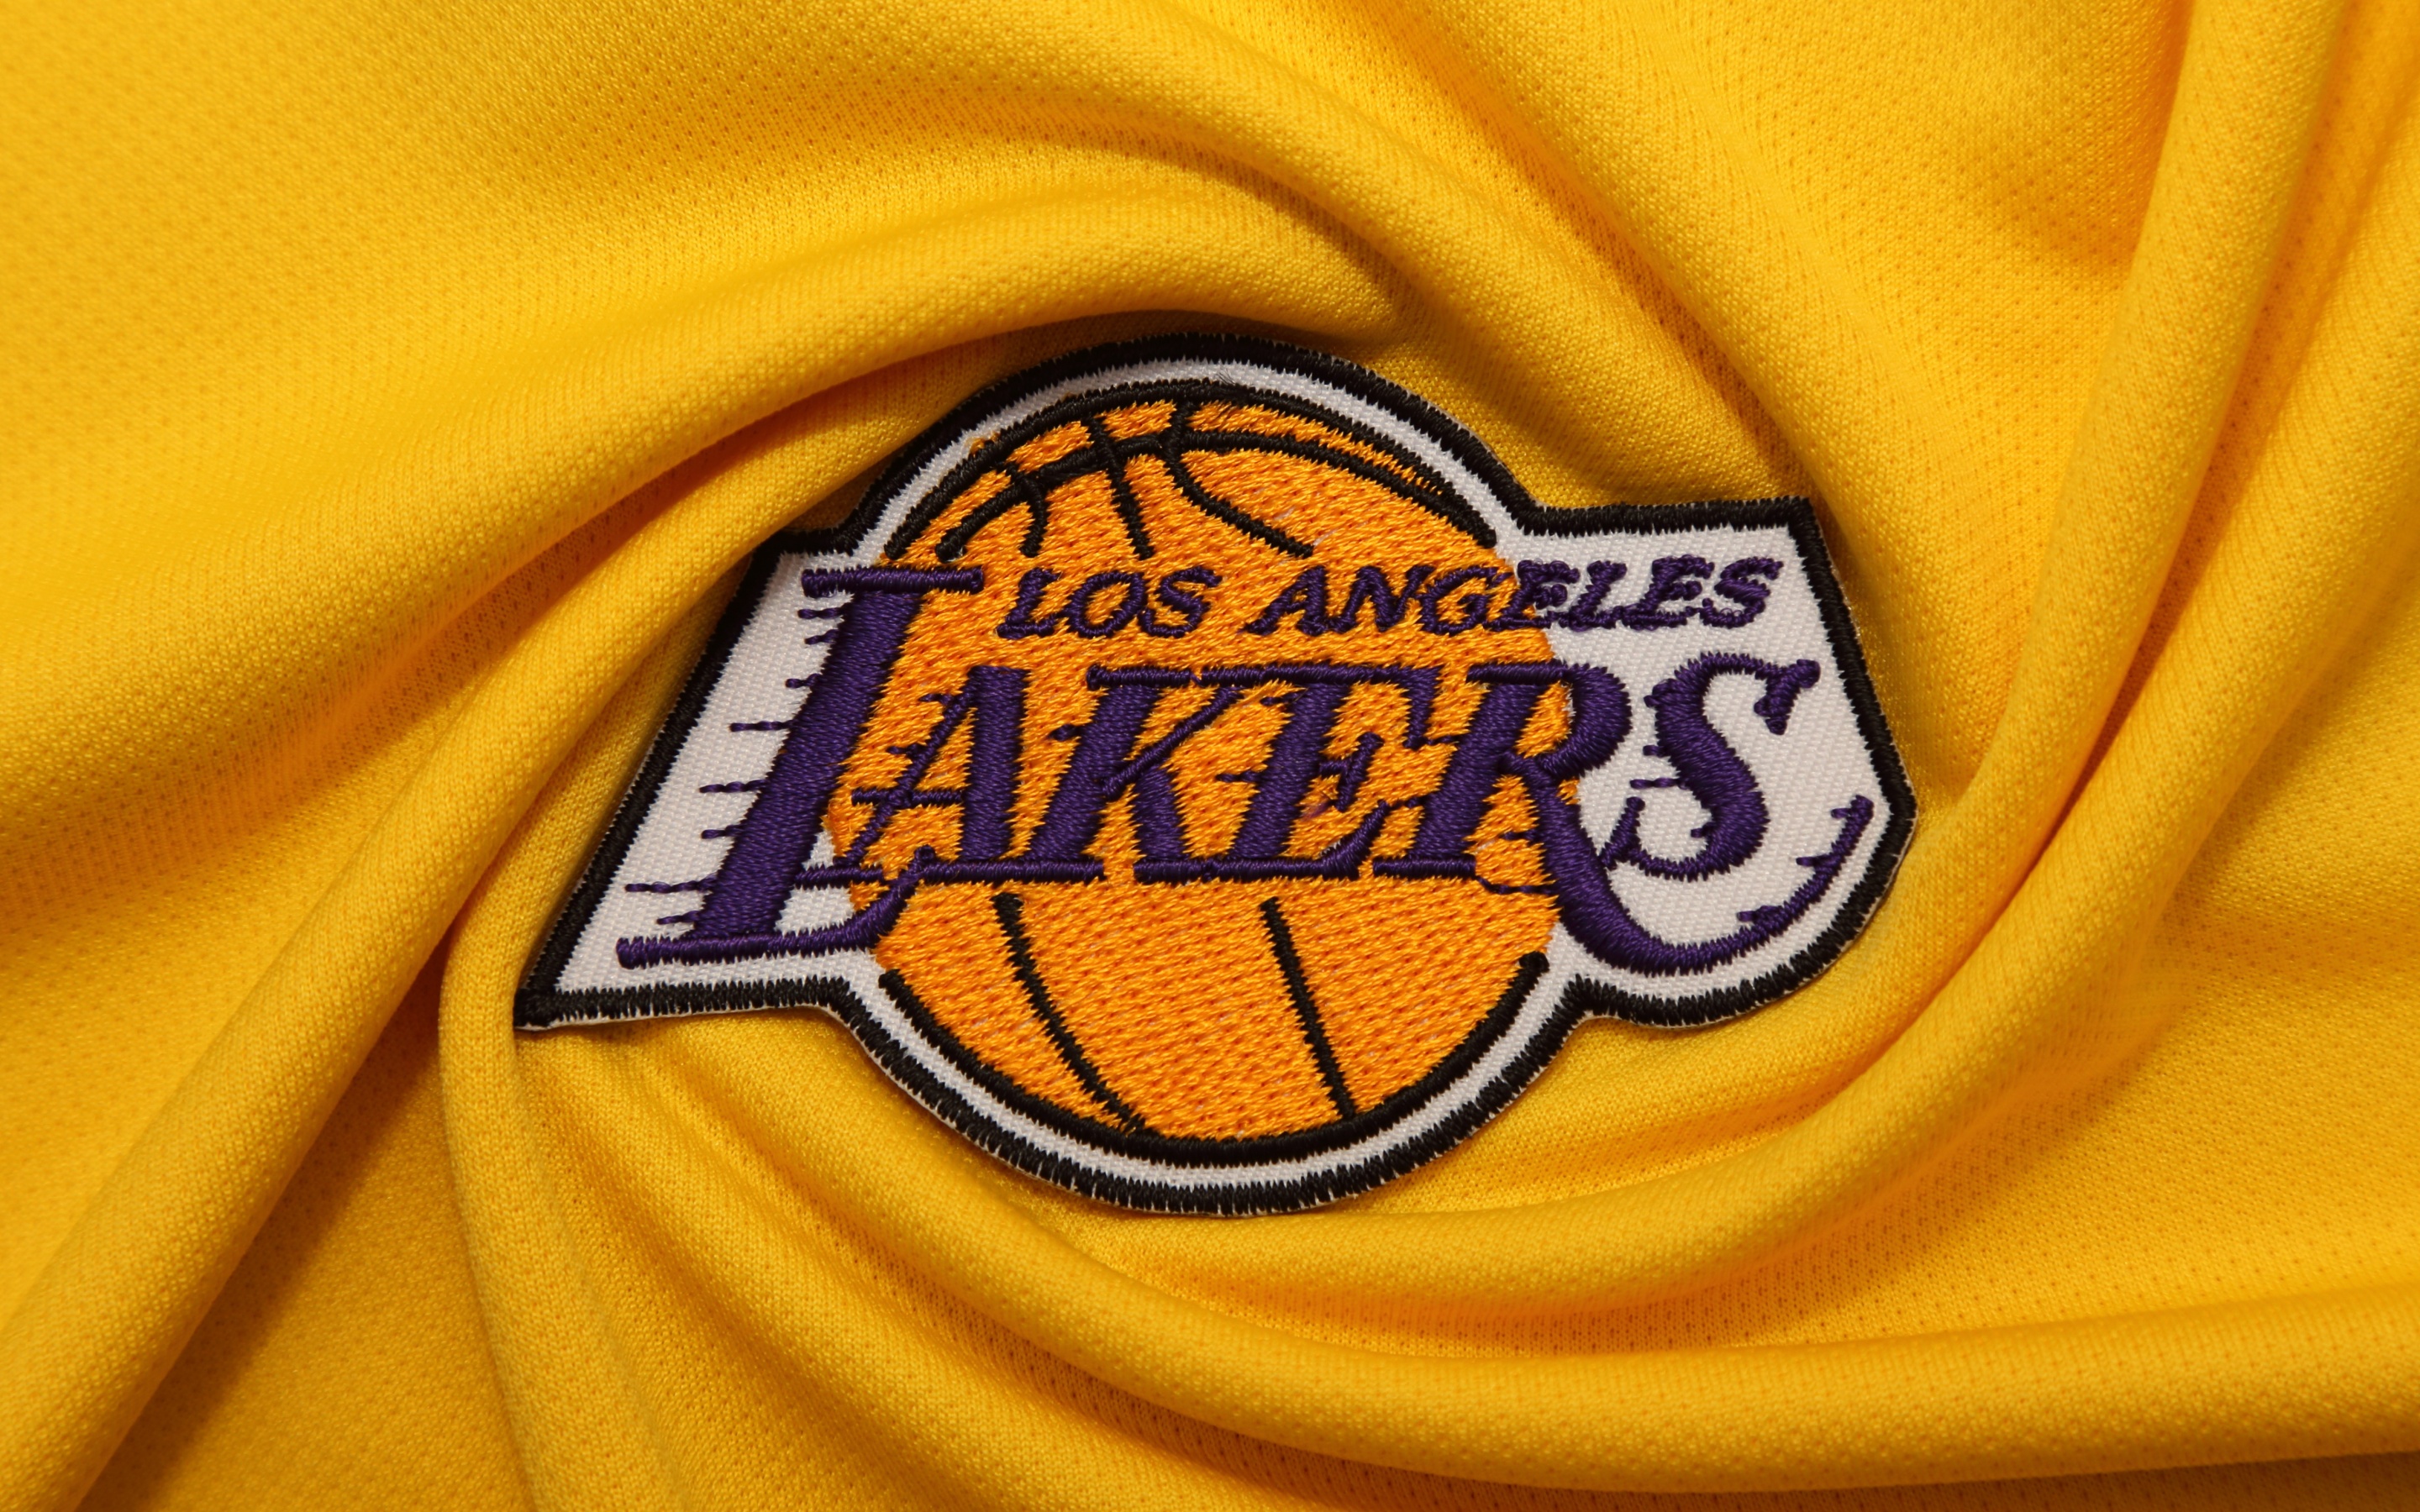 Wallpapers, Los Angeles Lakers